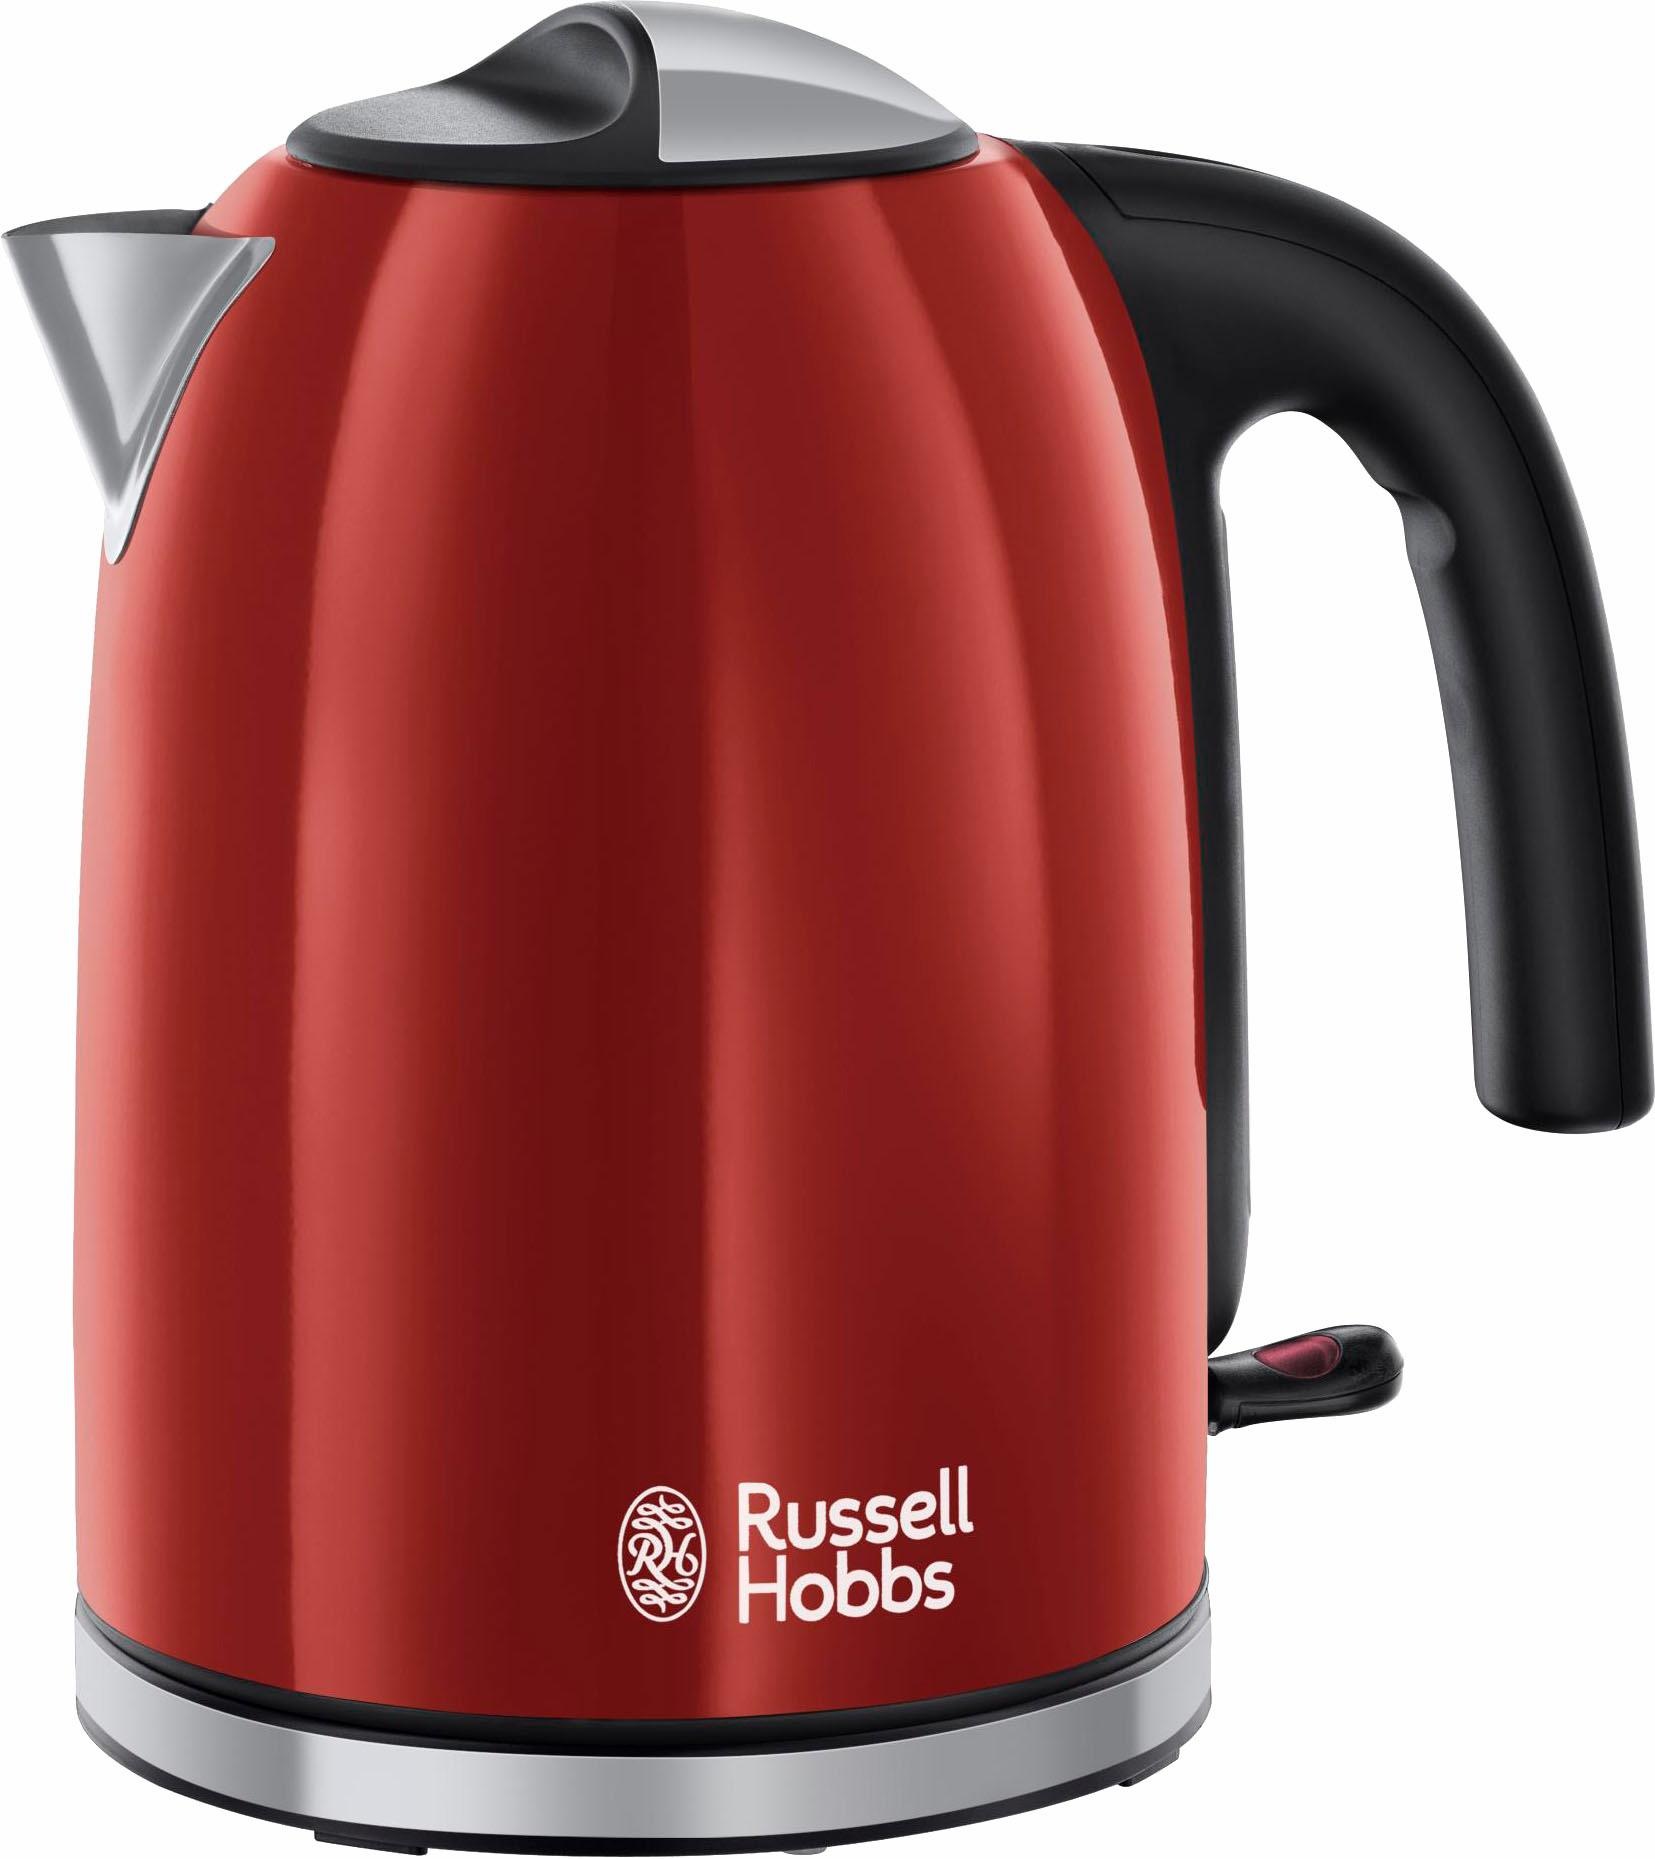 RUSSELL HOBBS Wasserkocher "20412-70 WK Colours Plus+ Flame Red", 1,7 l, 2400 W